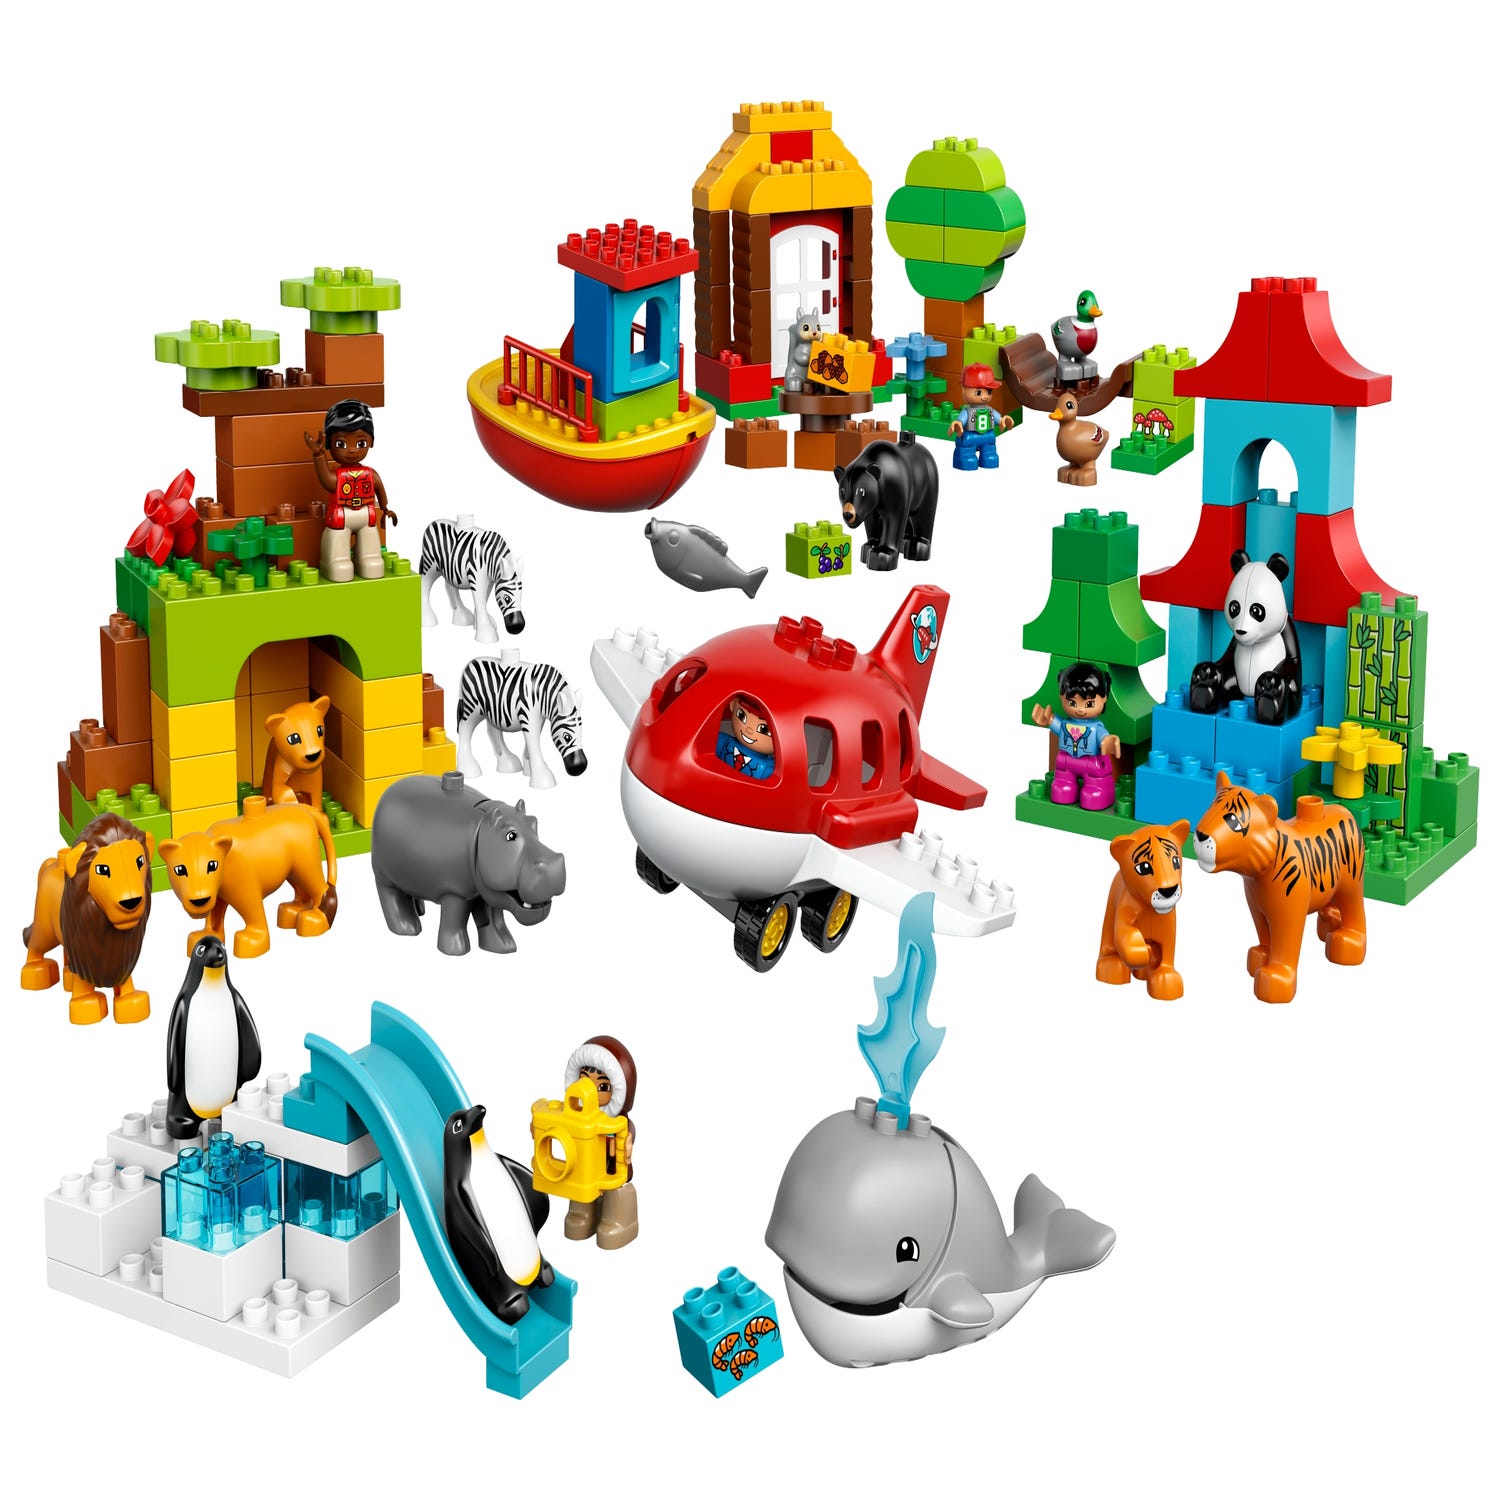 Around the World 10805 | DUPLO® | Buy online at the LEGO® Shop US